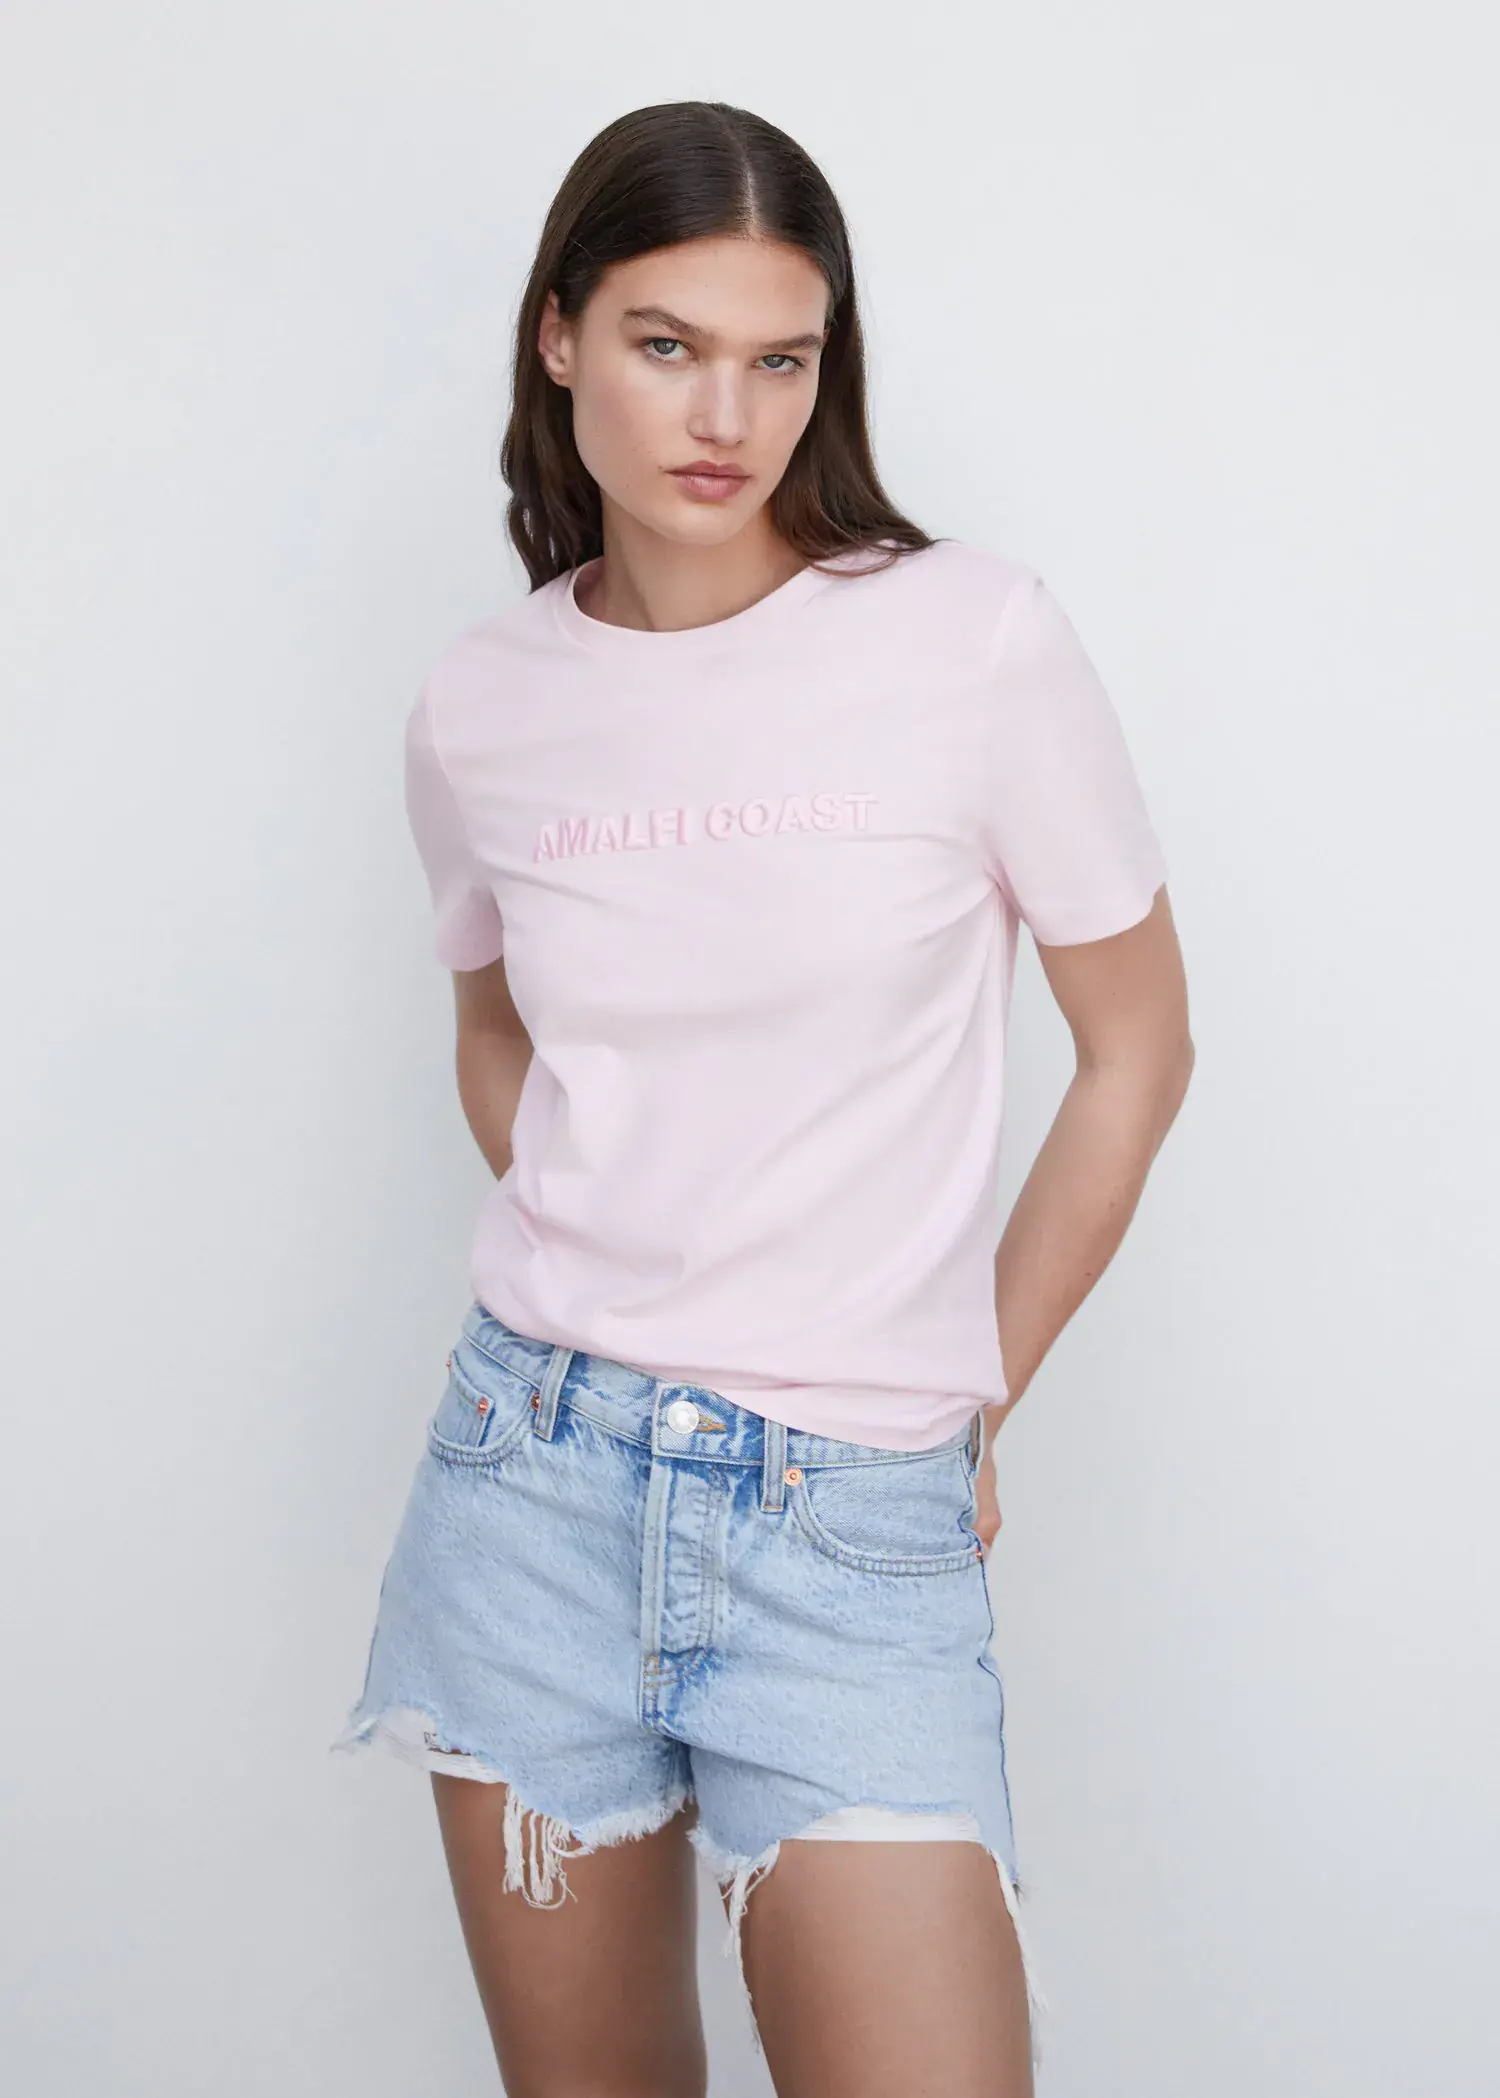 Mango Embroidered message T-shirt. a woman in a pink t-shirt and blue jean shorts. 